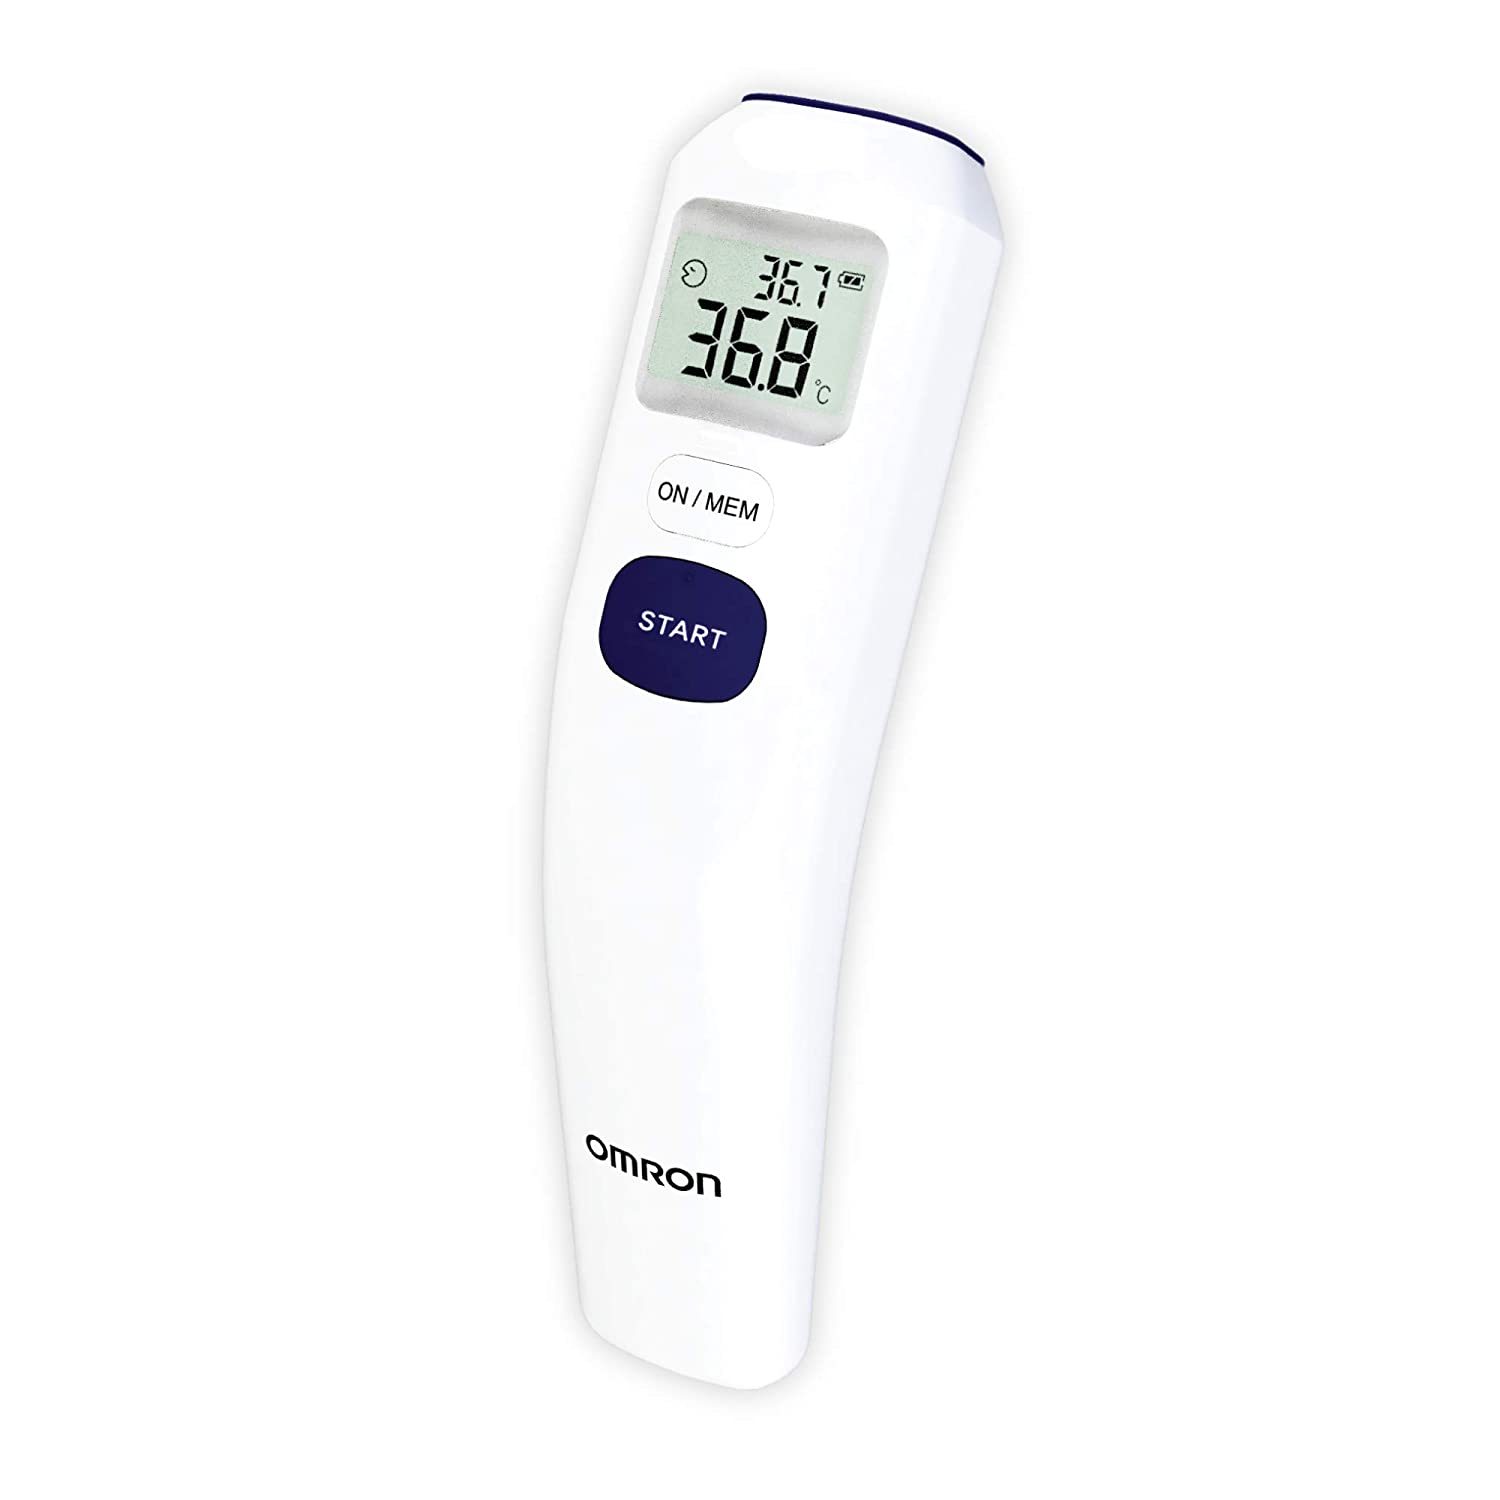 Omron-MC-720-Non-Contact-Digital-Infrared-Forehead-Thermometer-With-1-Second-Quick-Measurement-3-in-1-Measurement-Mode.jpg